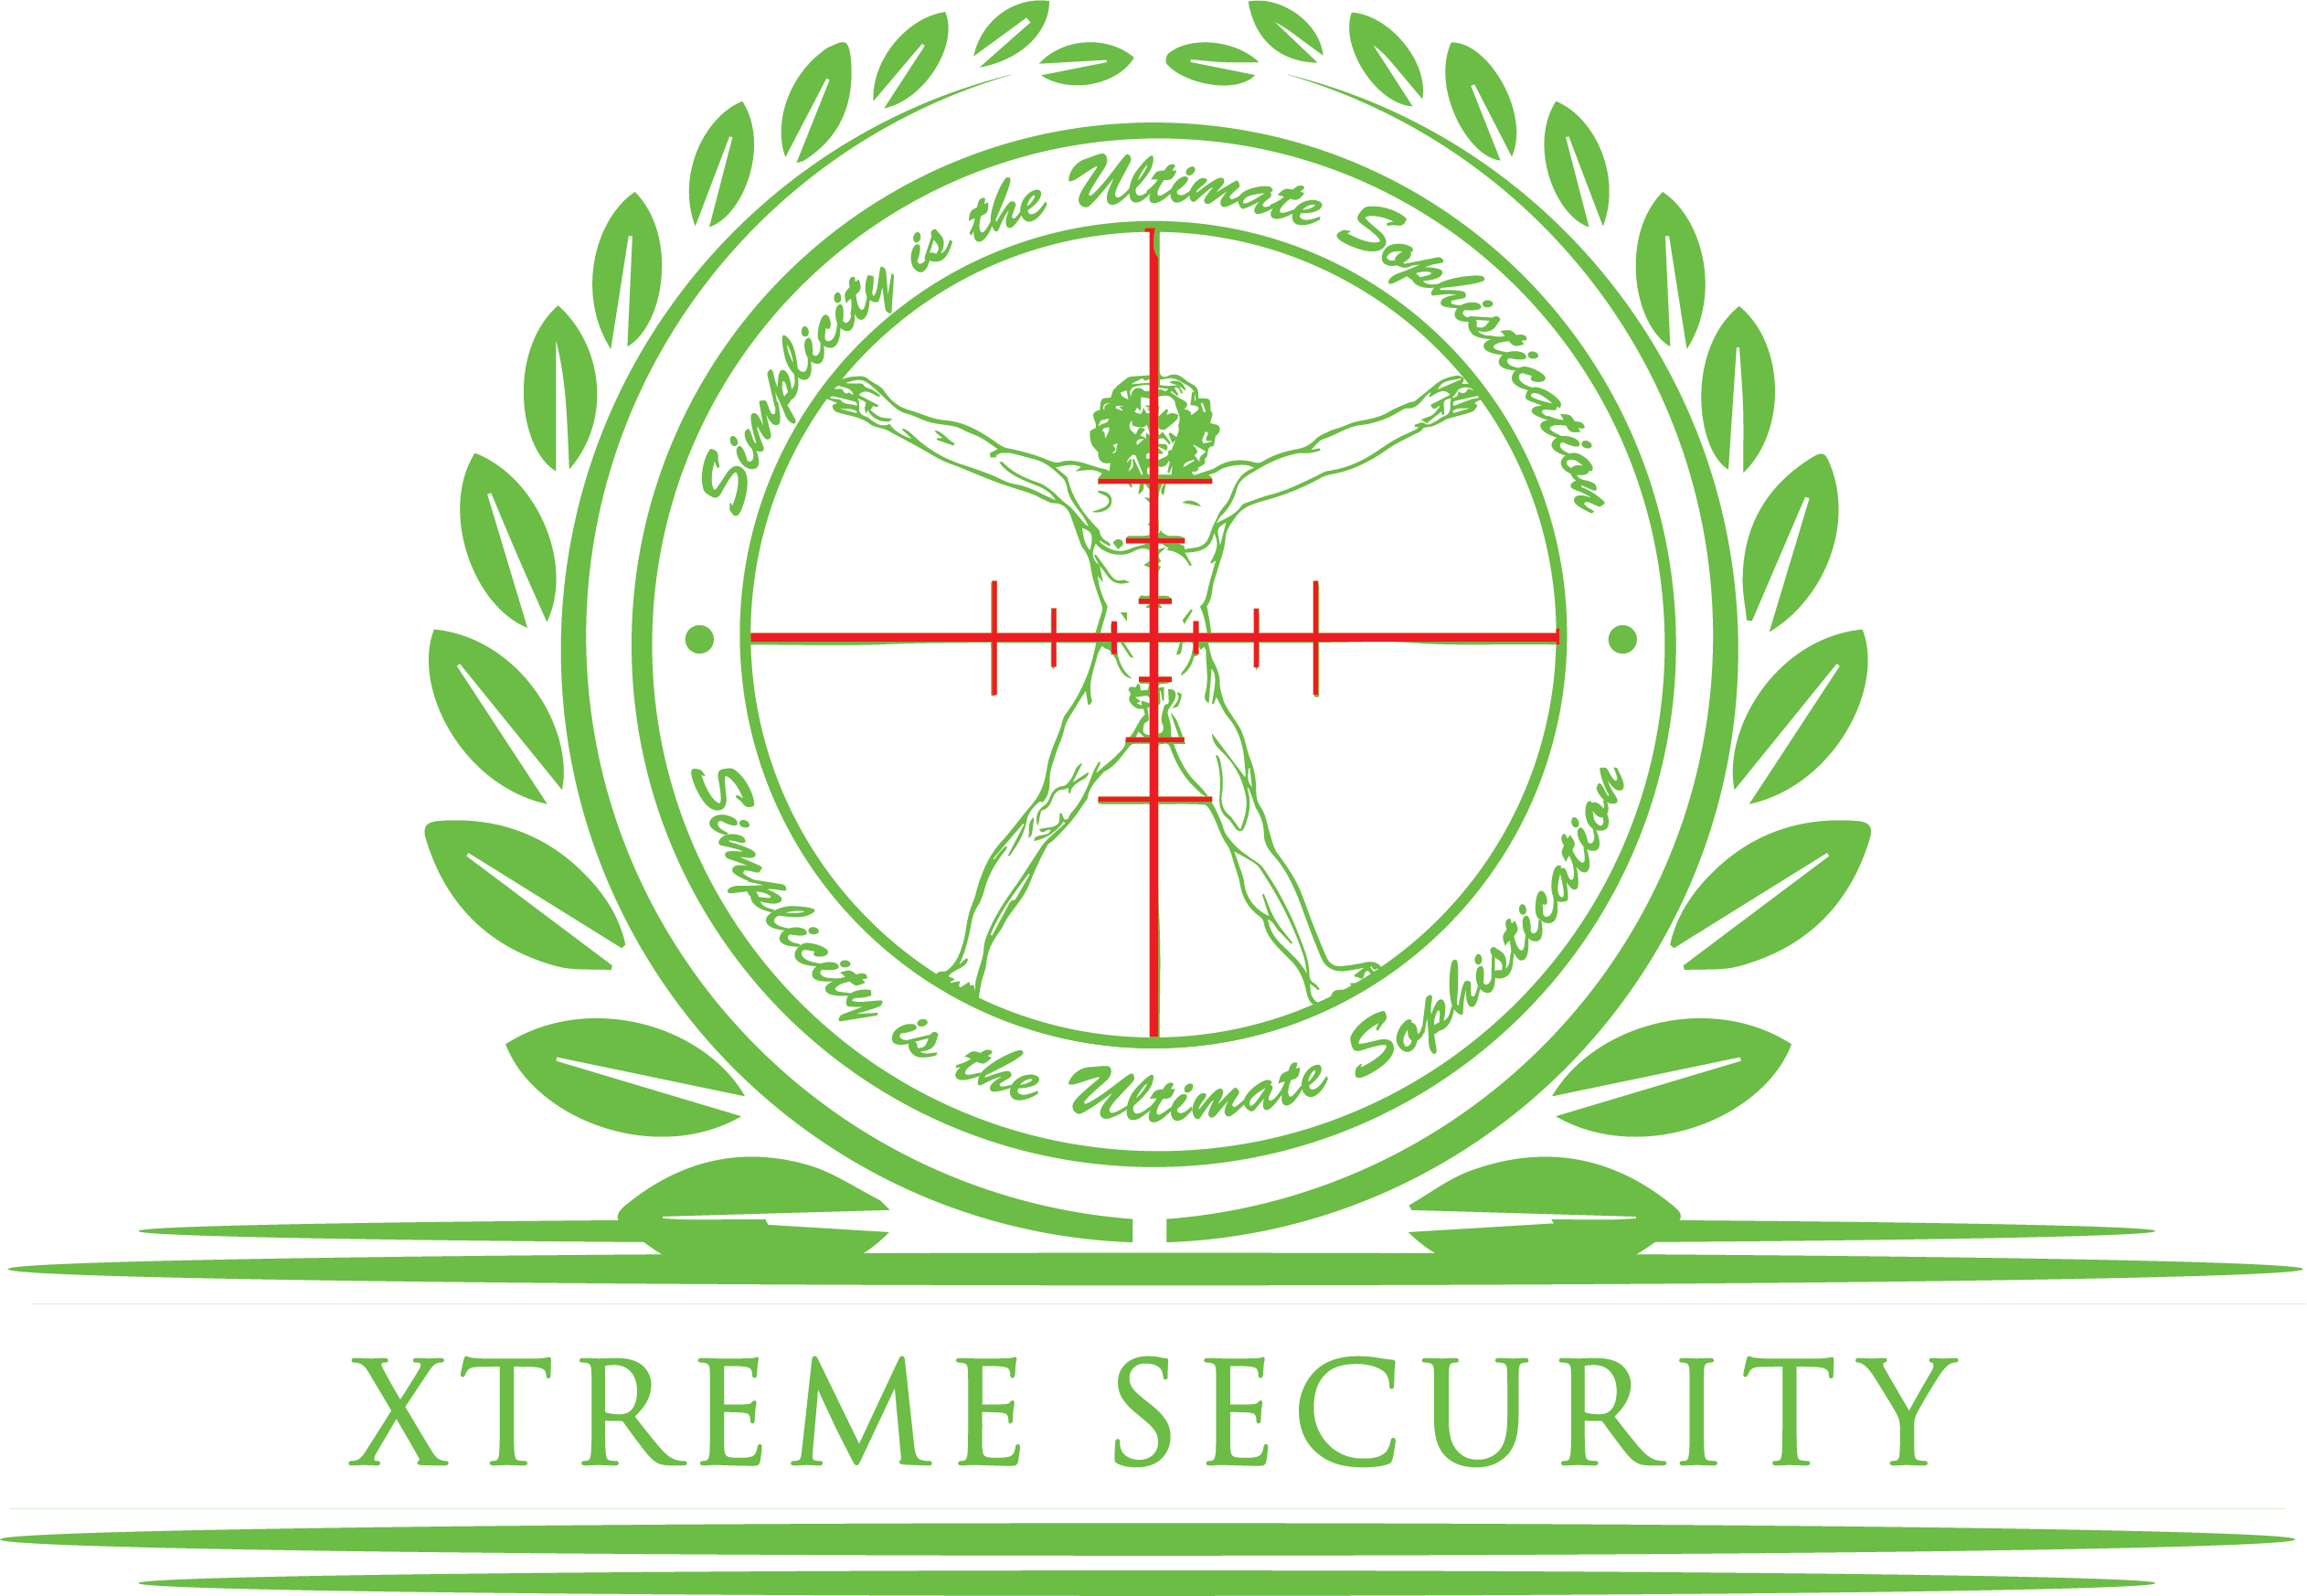 Extreme security